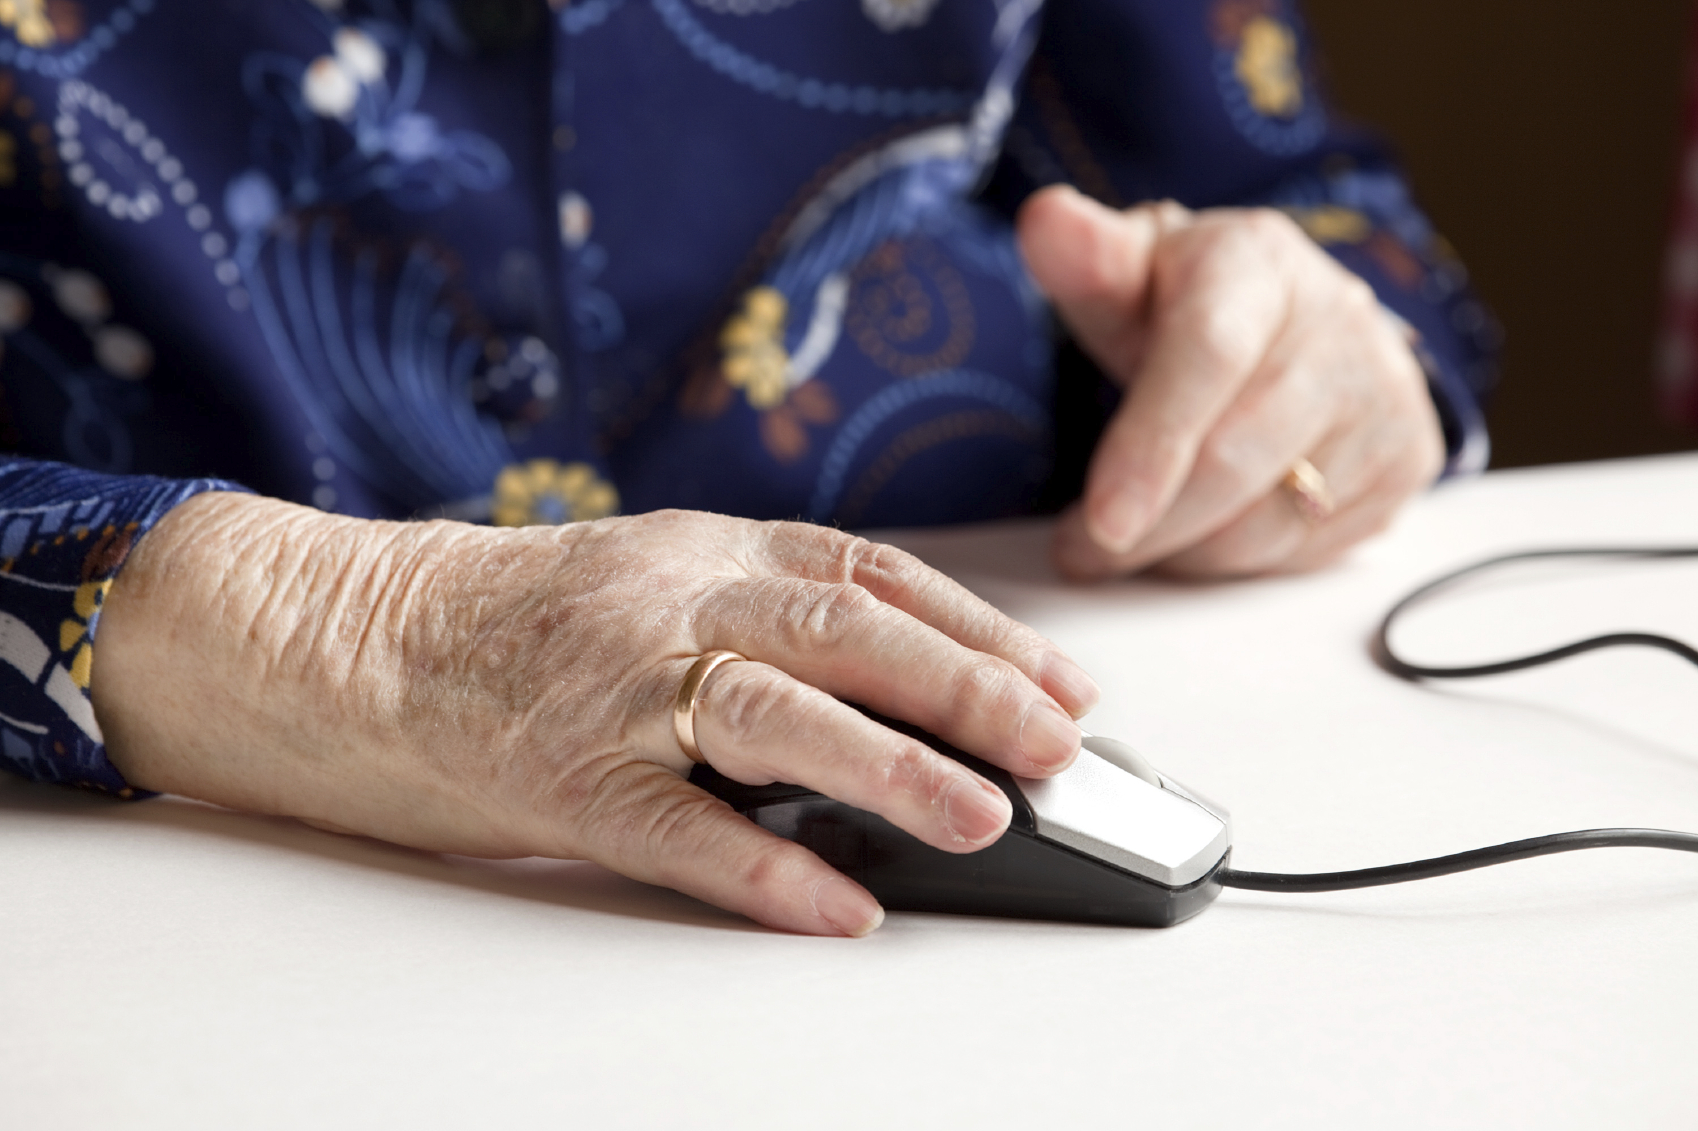 Stay connected! Family caregivers of people with dementia may benefit from online and telephone support